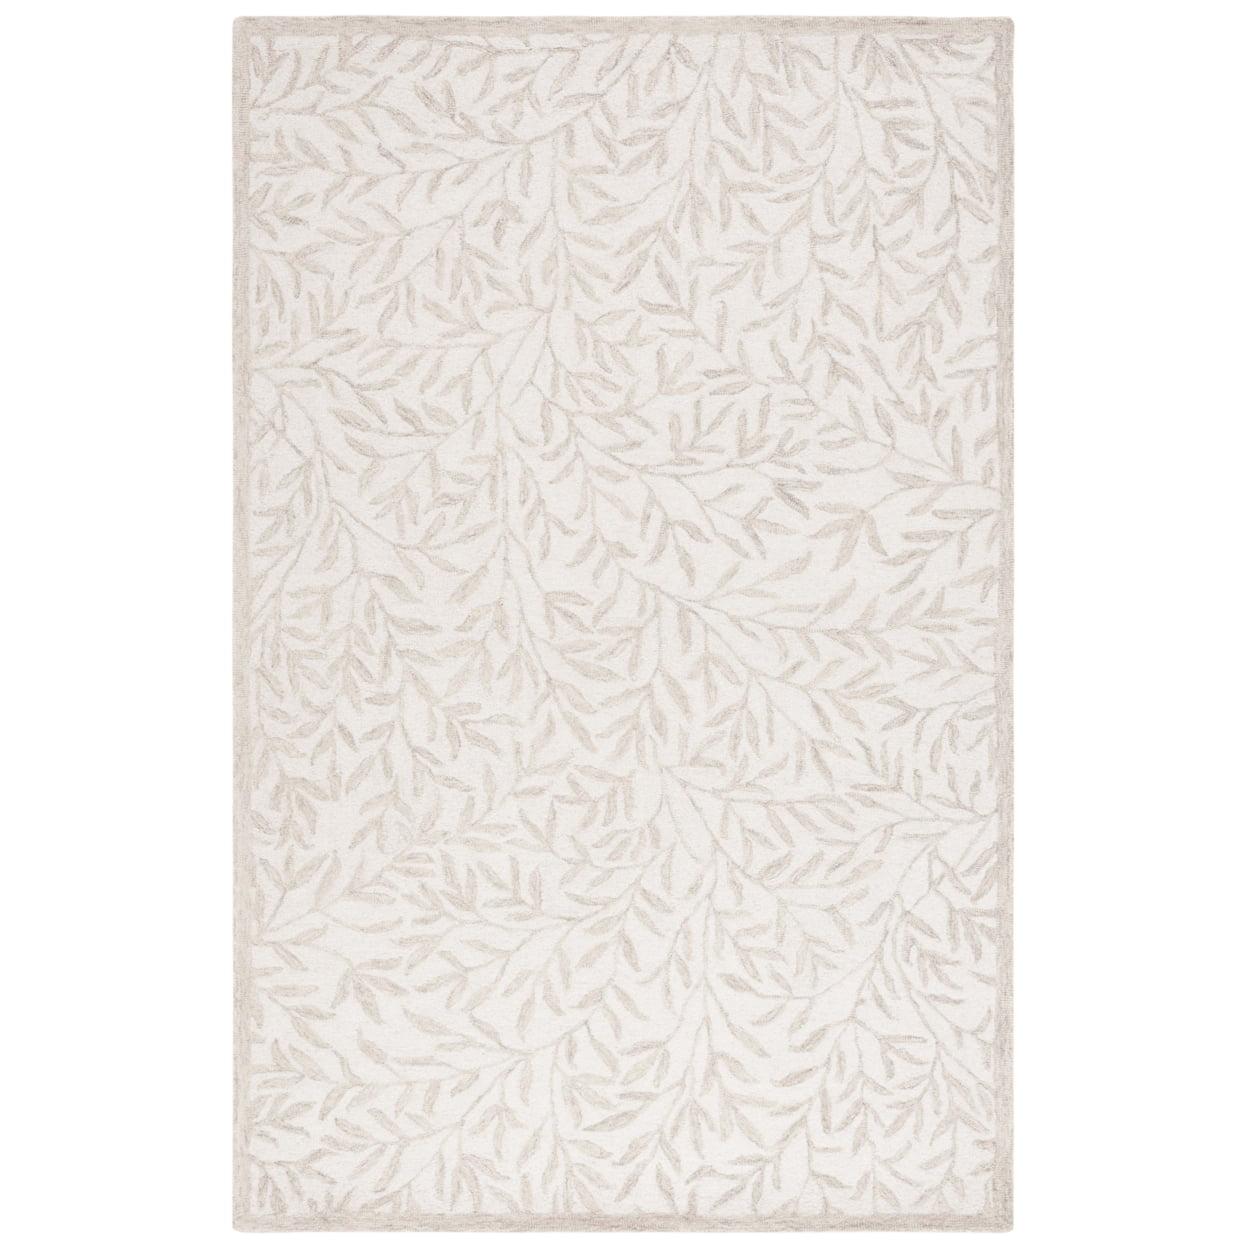 Ivory Hand-Tufted Wool Floral 3' x 5' Area Rug